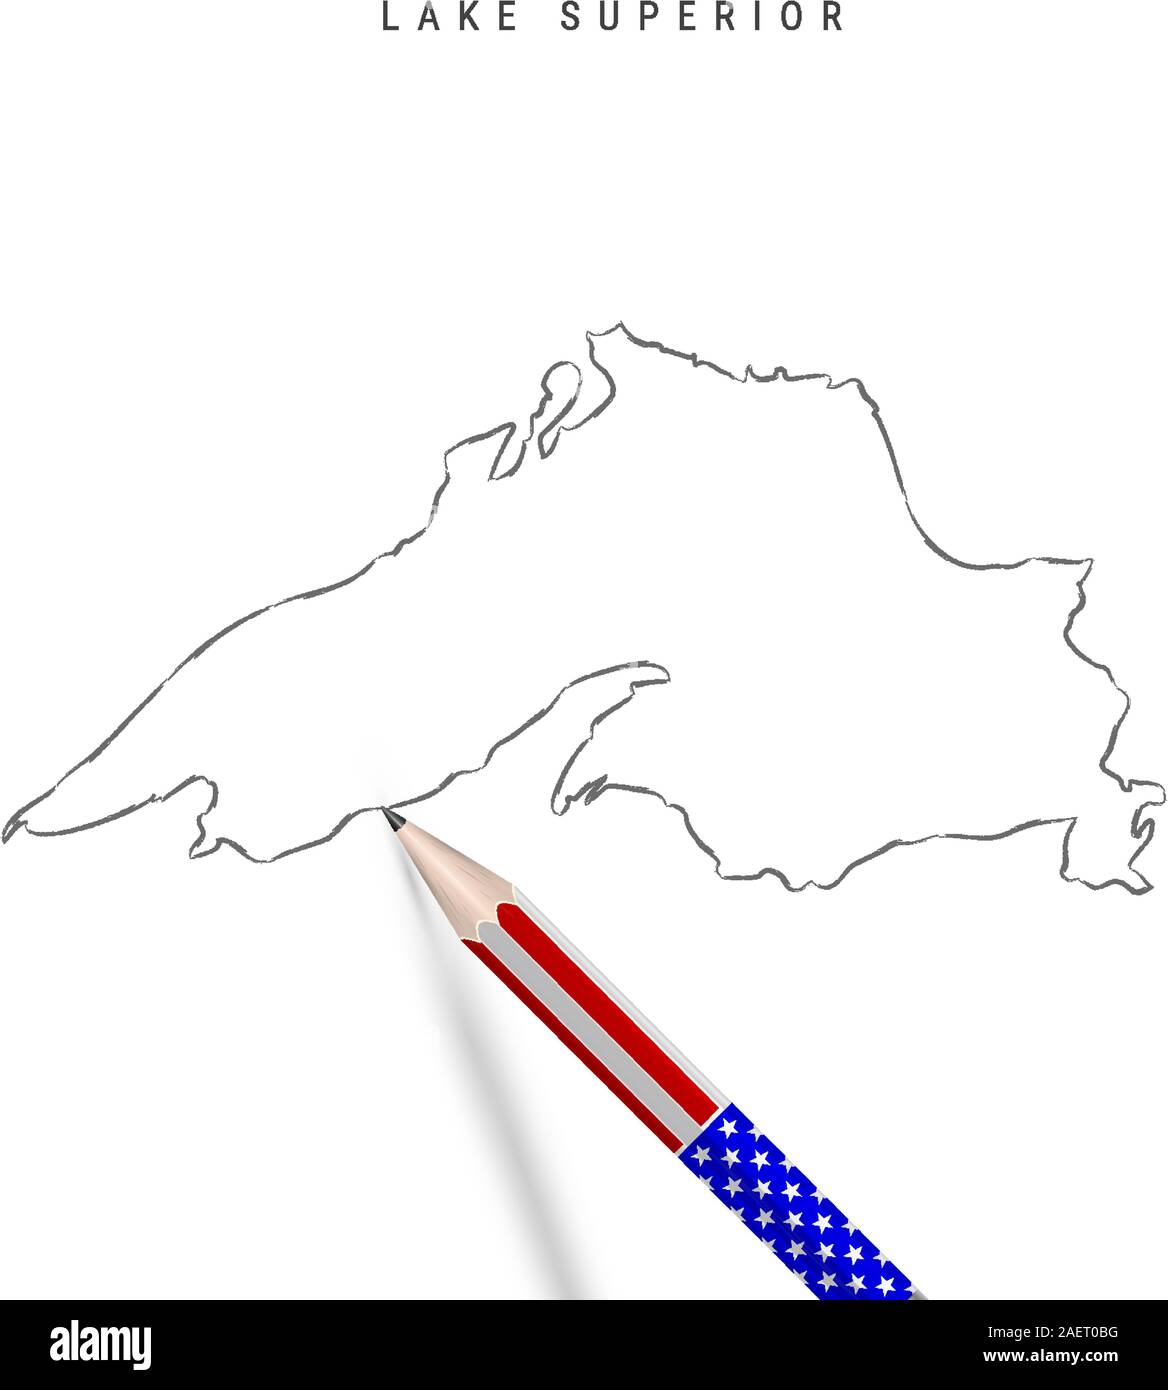 Lake Superior vector map pencil sketch. Lake Superior outline contour map with 3D pencil in american flag colors. Freehand drawing vector, hand drawn Stock Vector